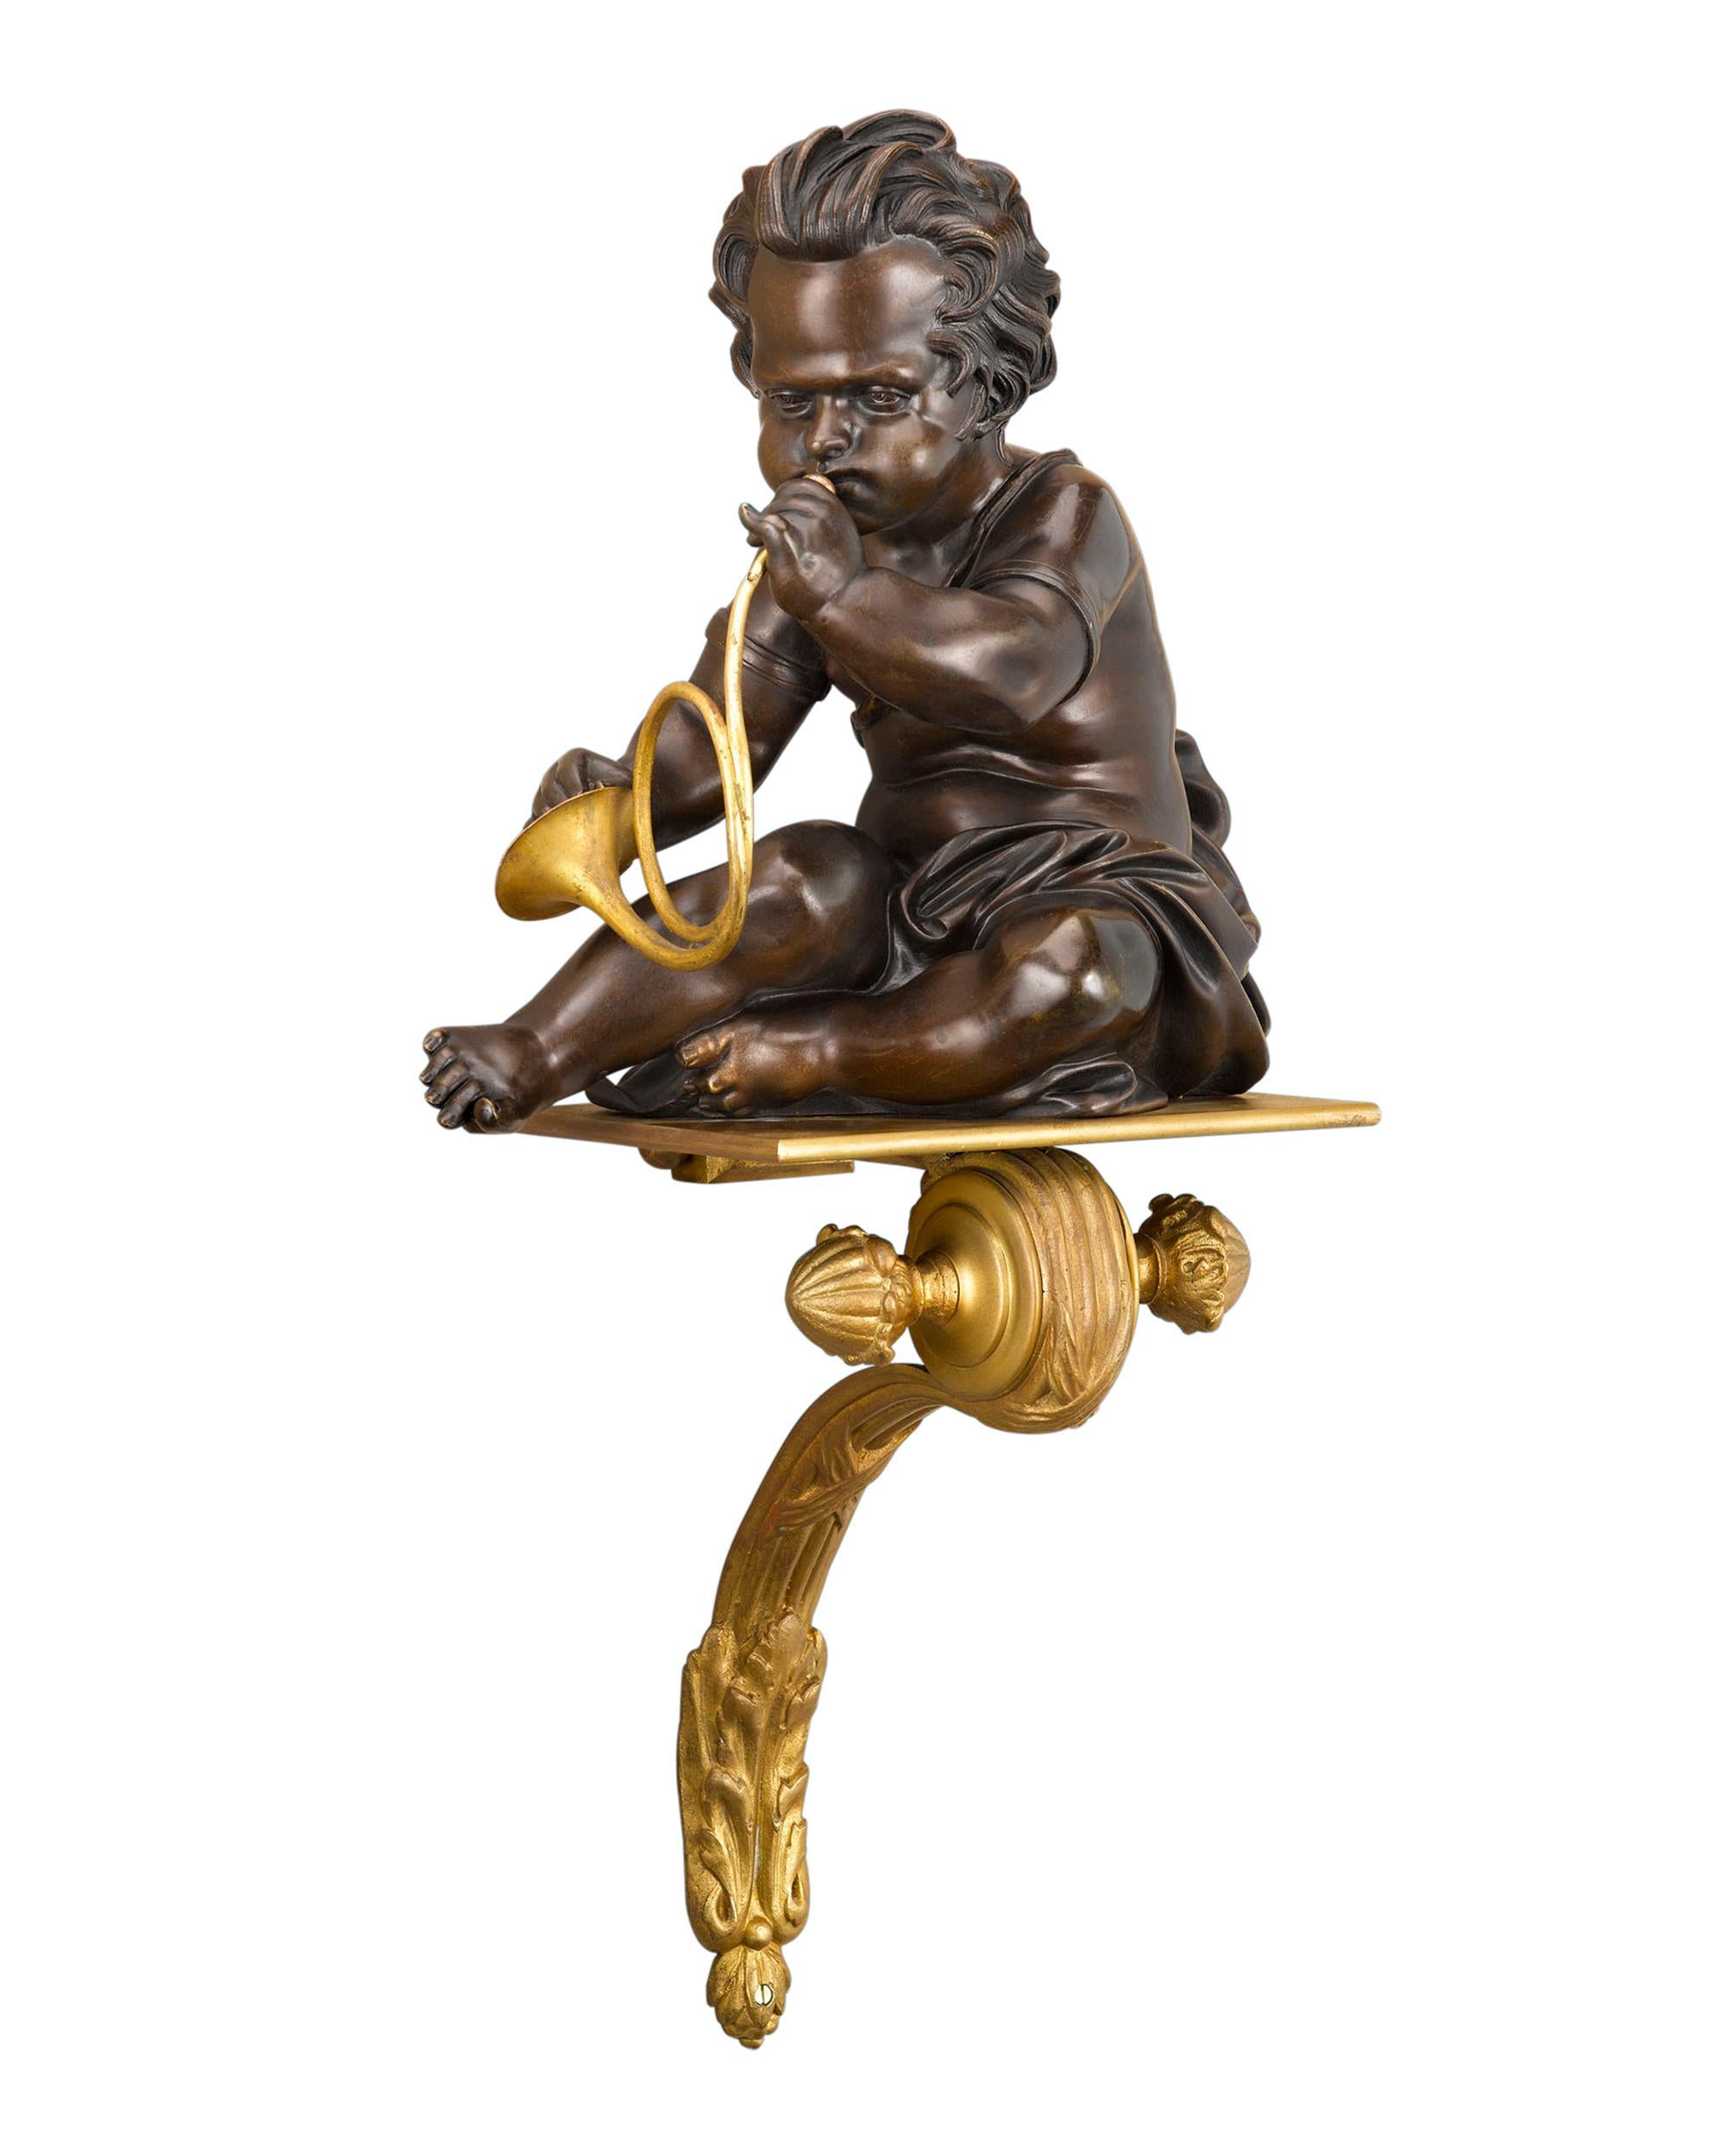 A duo of musically inclined putti plays a horn and cymbals in this rare and attractive pair of French wall brackets. The patinated bronze putti rest upon fine doré bronze platforms of elegant scroll form. circa 188022 3/4” high.